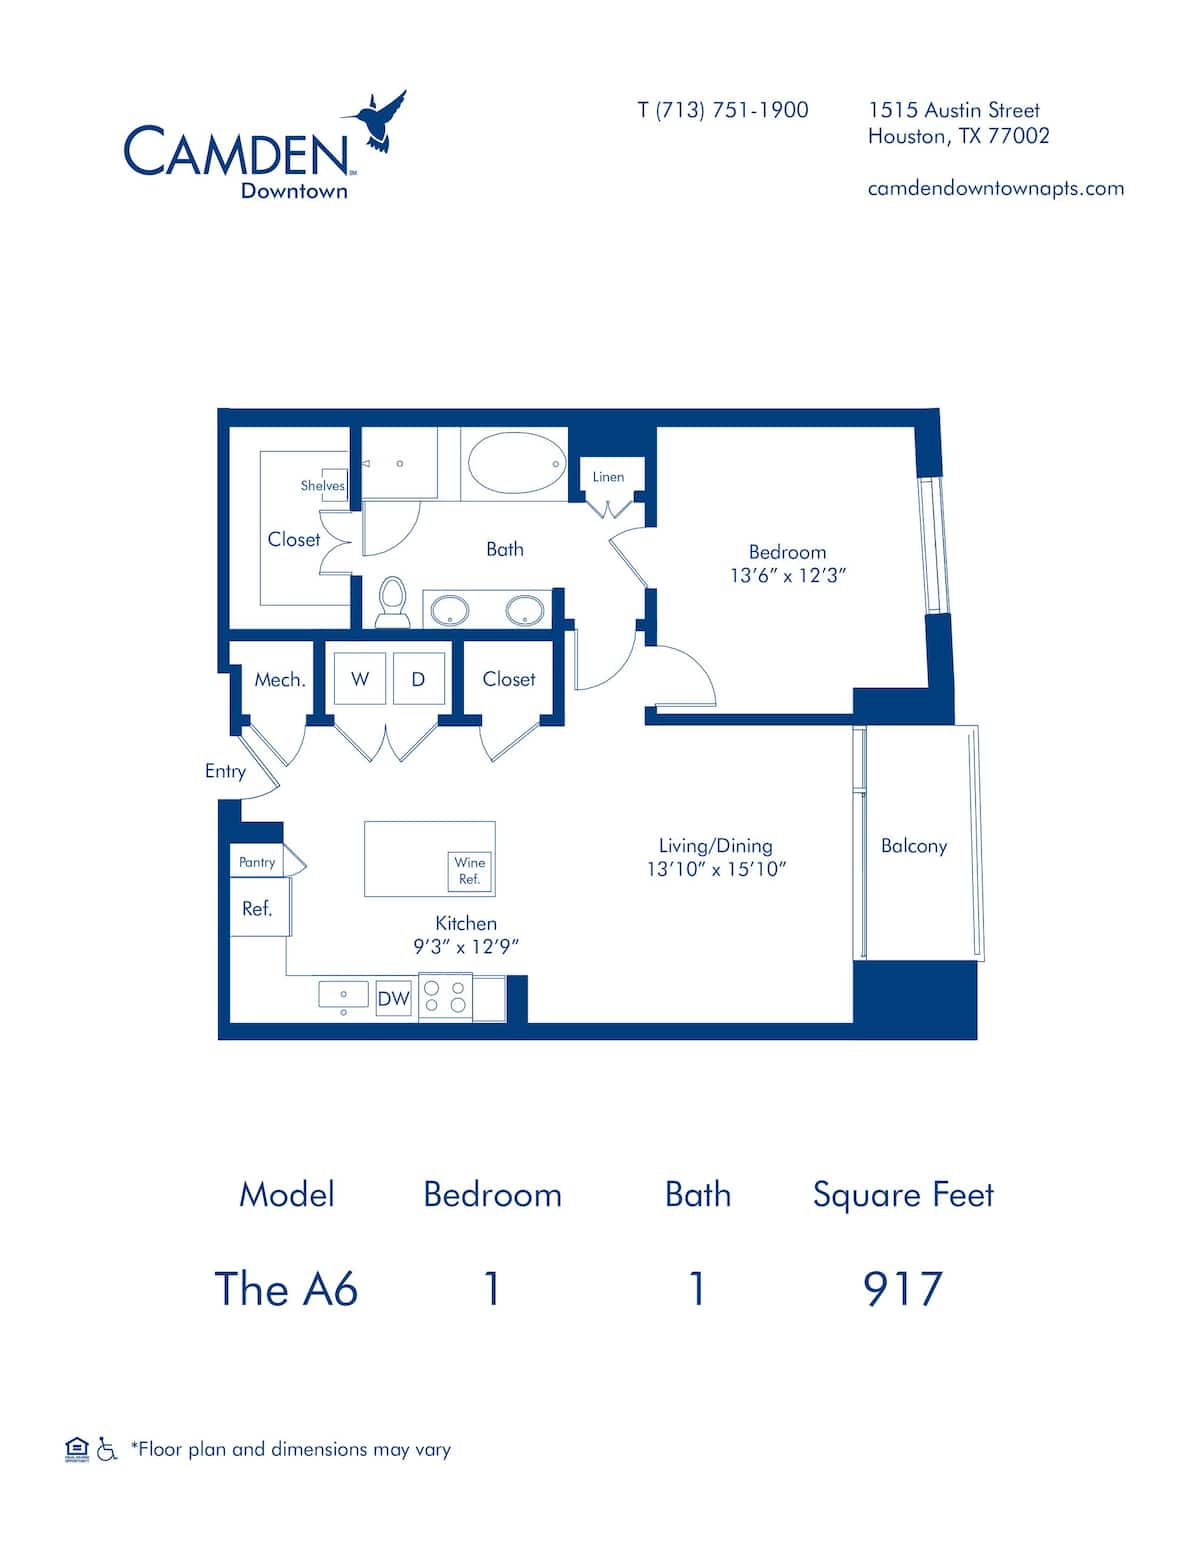 Floorplan diagram for The A6, showing 1 bedroom